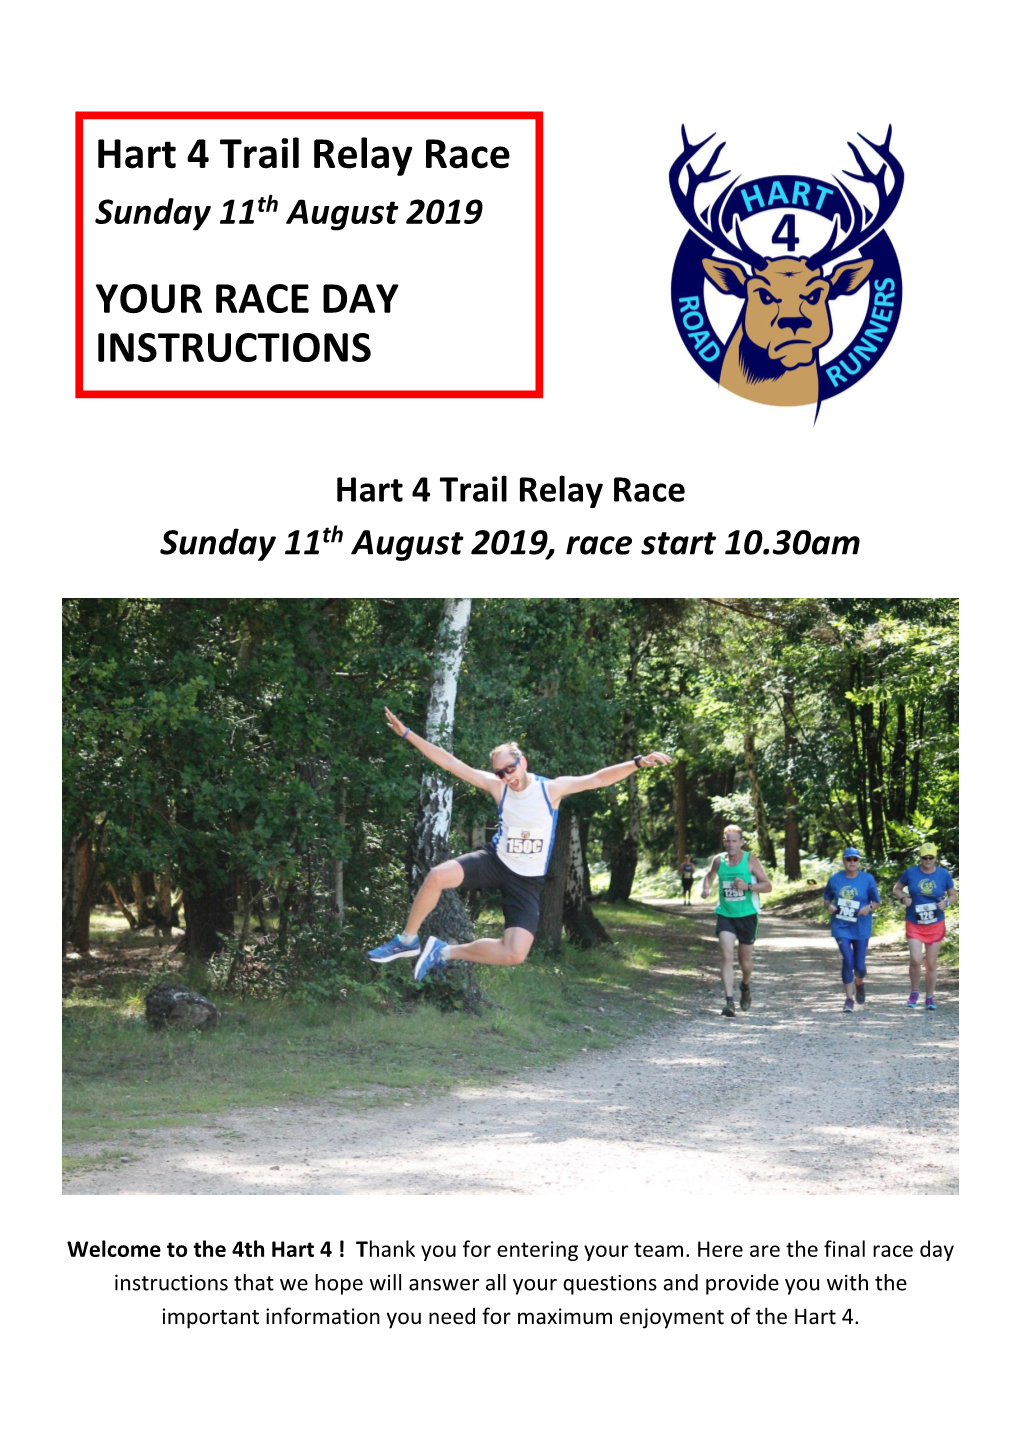 Hart 4 Trail Relay Race YOUR RACE DAY INSTRUCTIONS